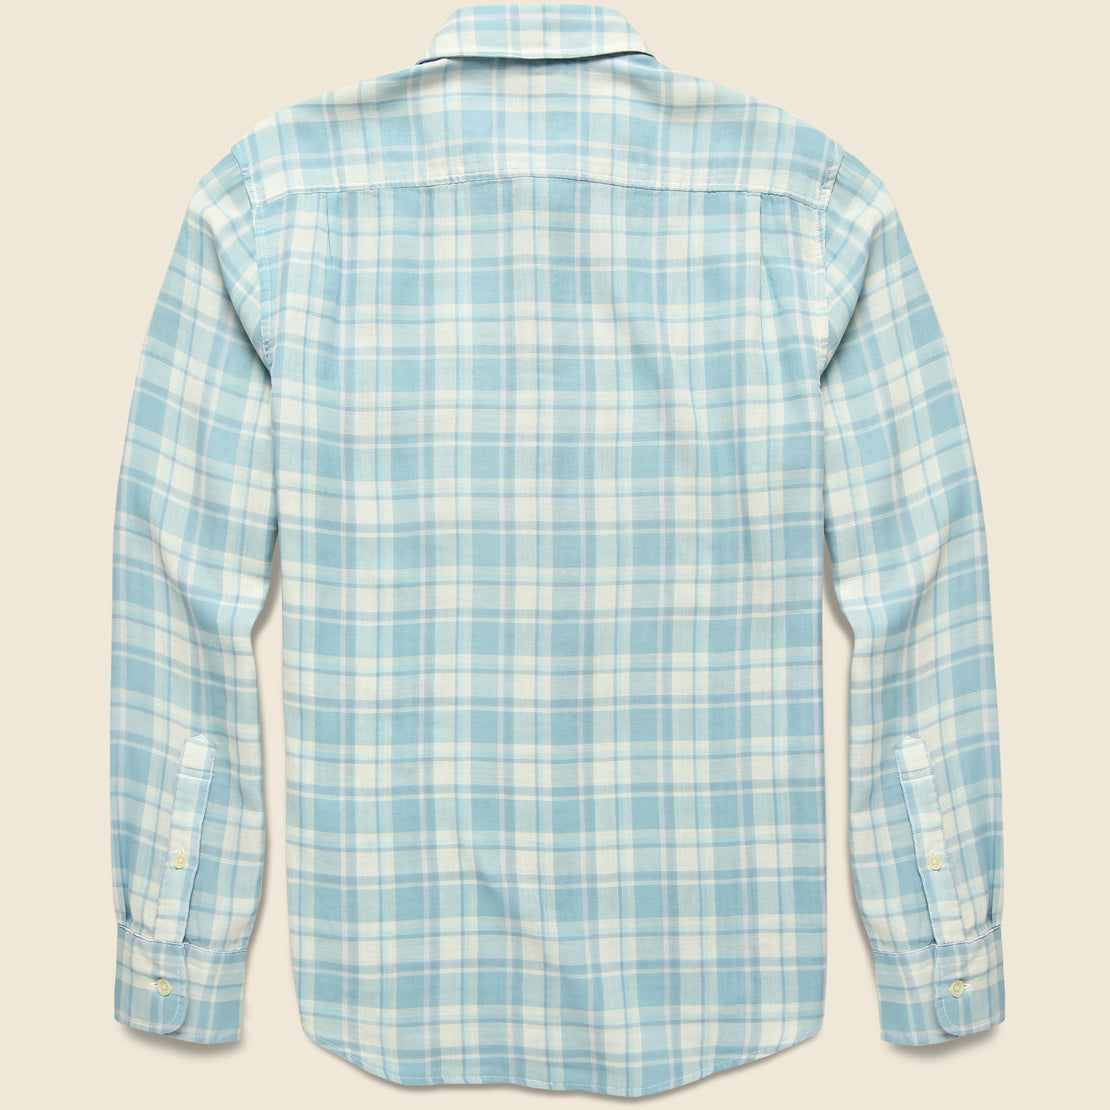 The Chill Doublecloth Shirt - Dana Point Plaid - Faherty - STAG Provisions - Tops - L/S Woven - Plaid